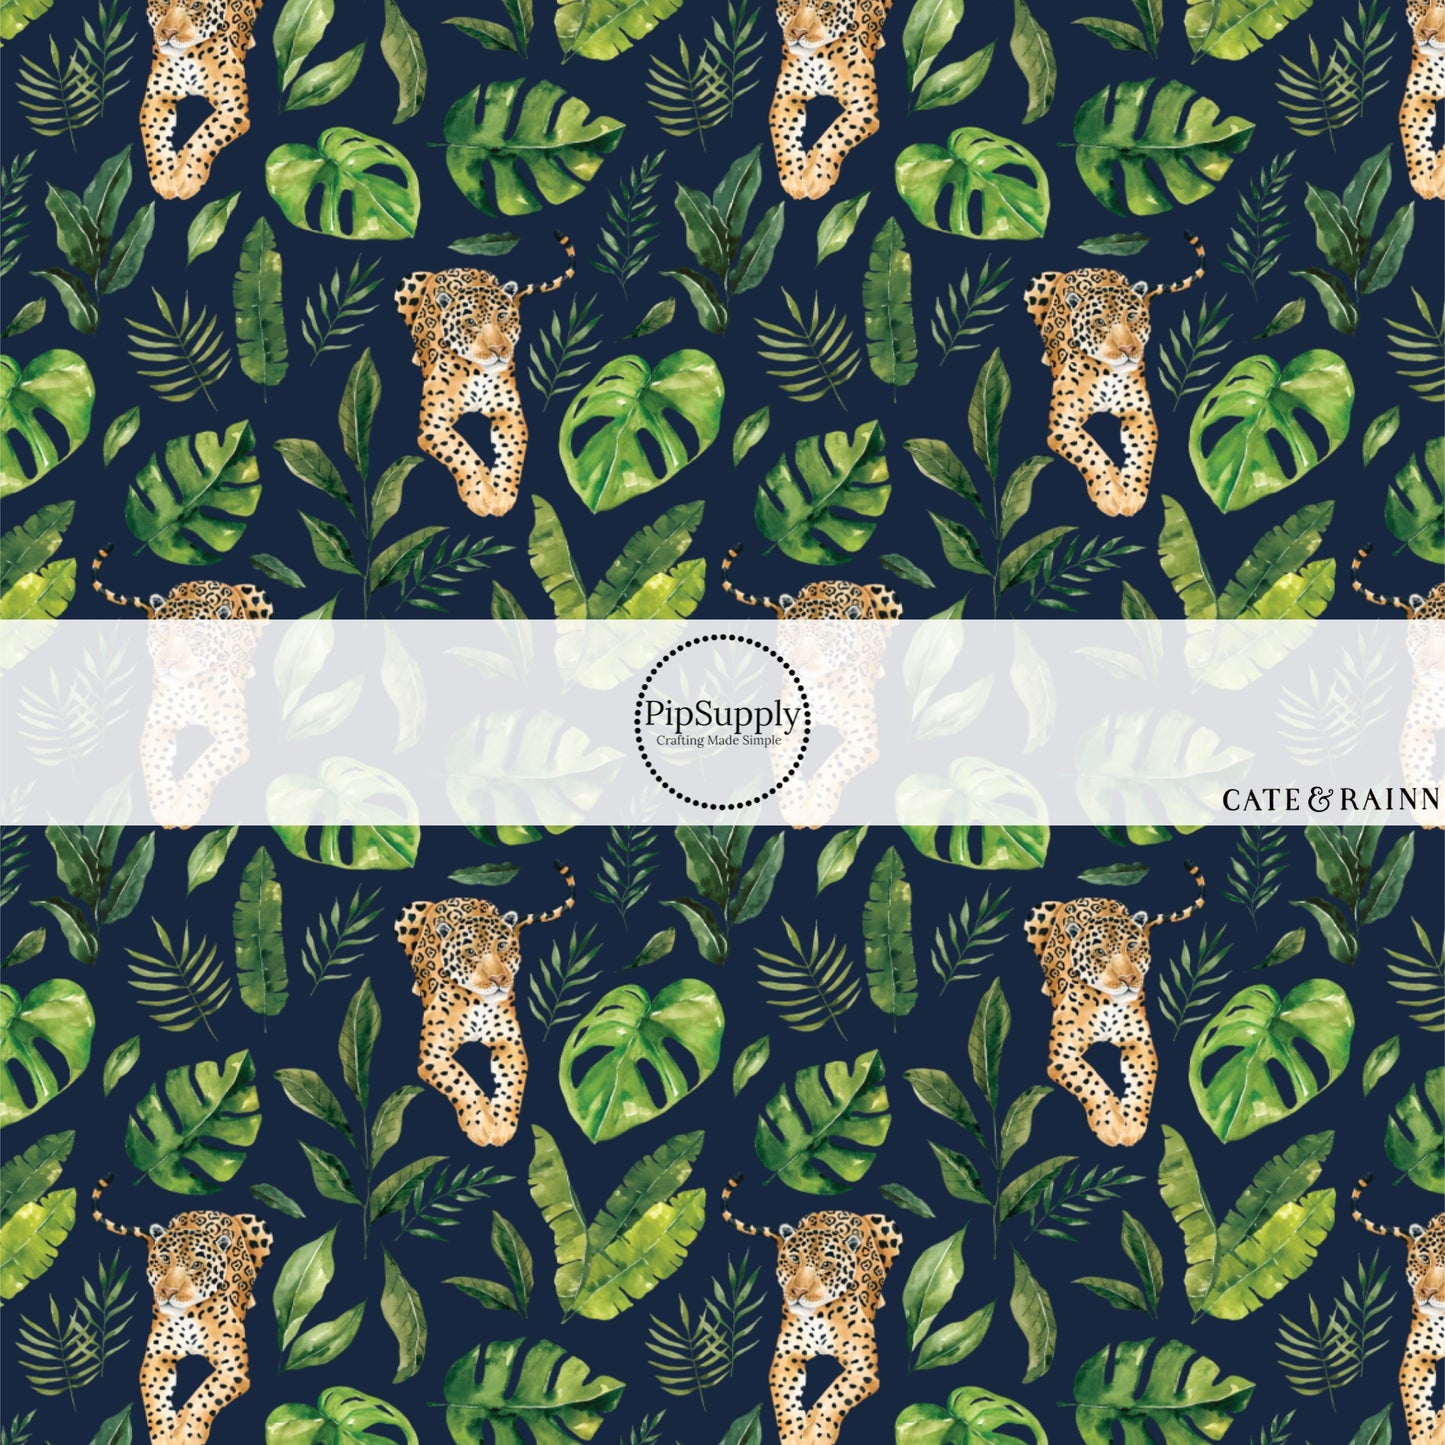 These jungle pattern fabric by the yard features tropical jaguars. This fun fabric can be used for all your sewing and crafting needs!